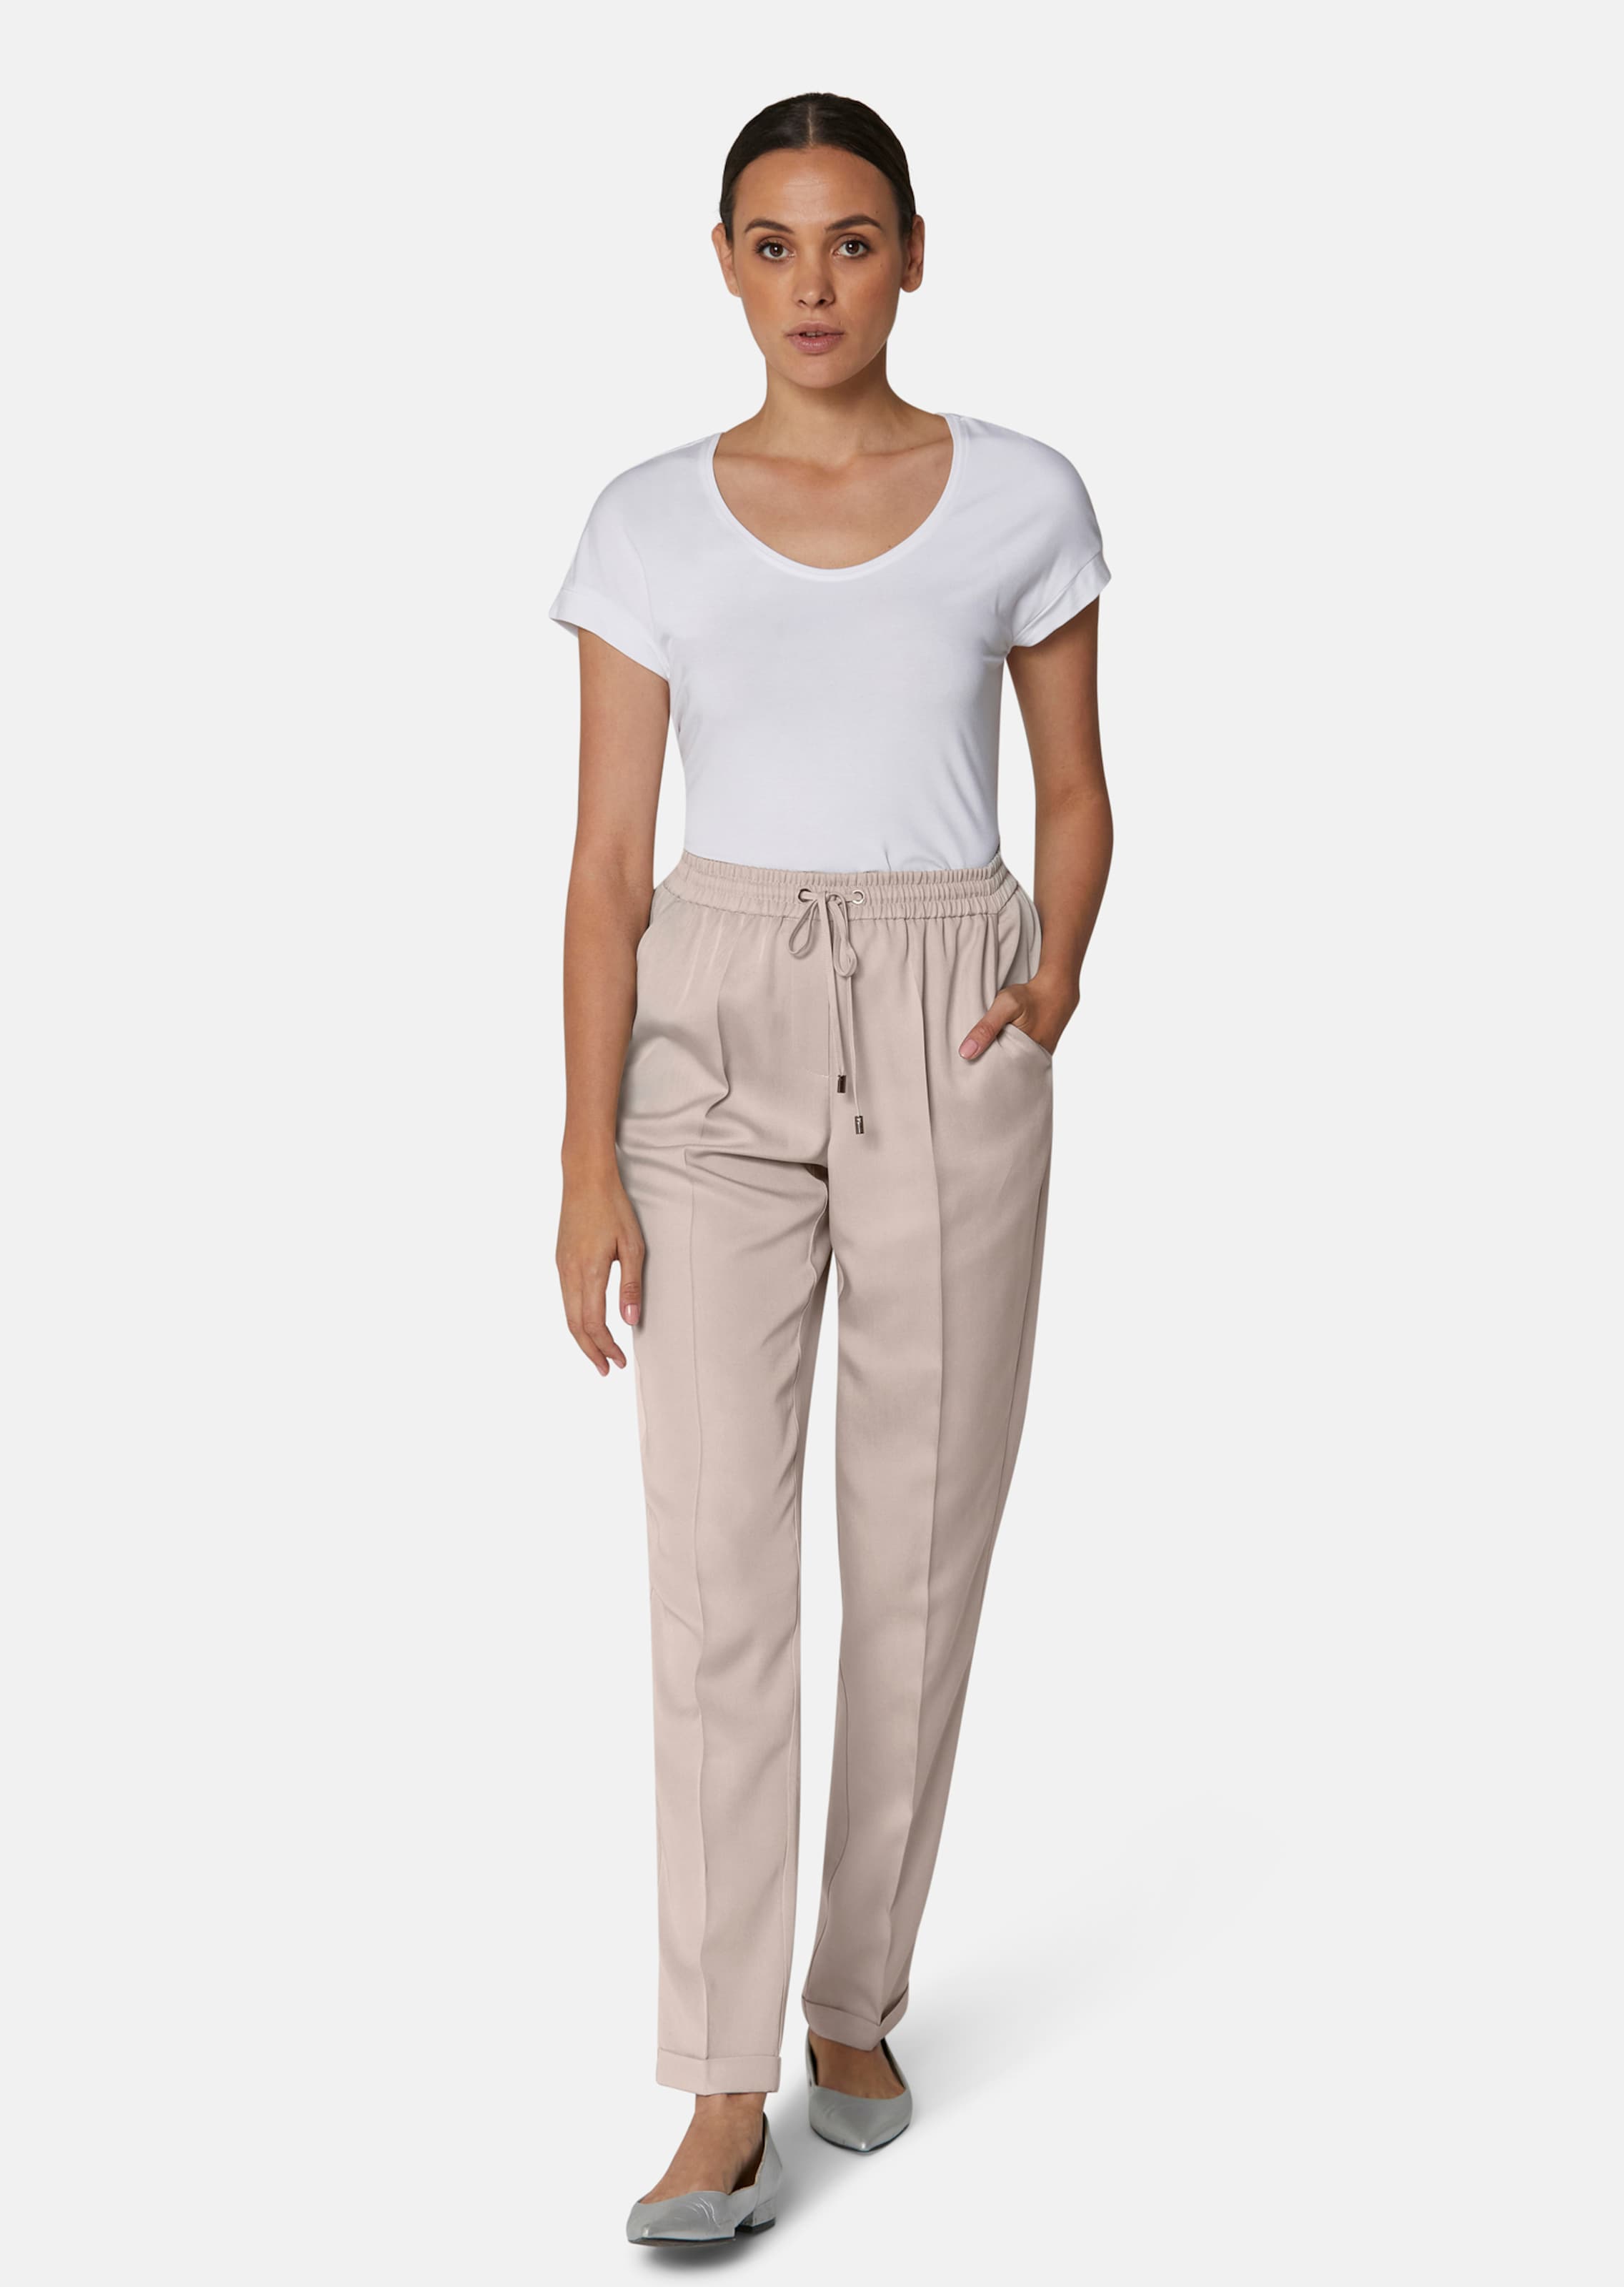 slip-on trousers Myha beige by OPUS | shop your favourites online